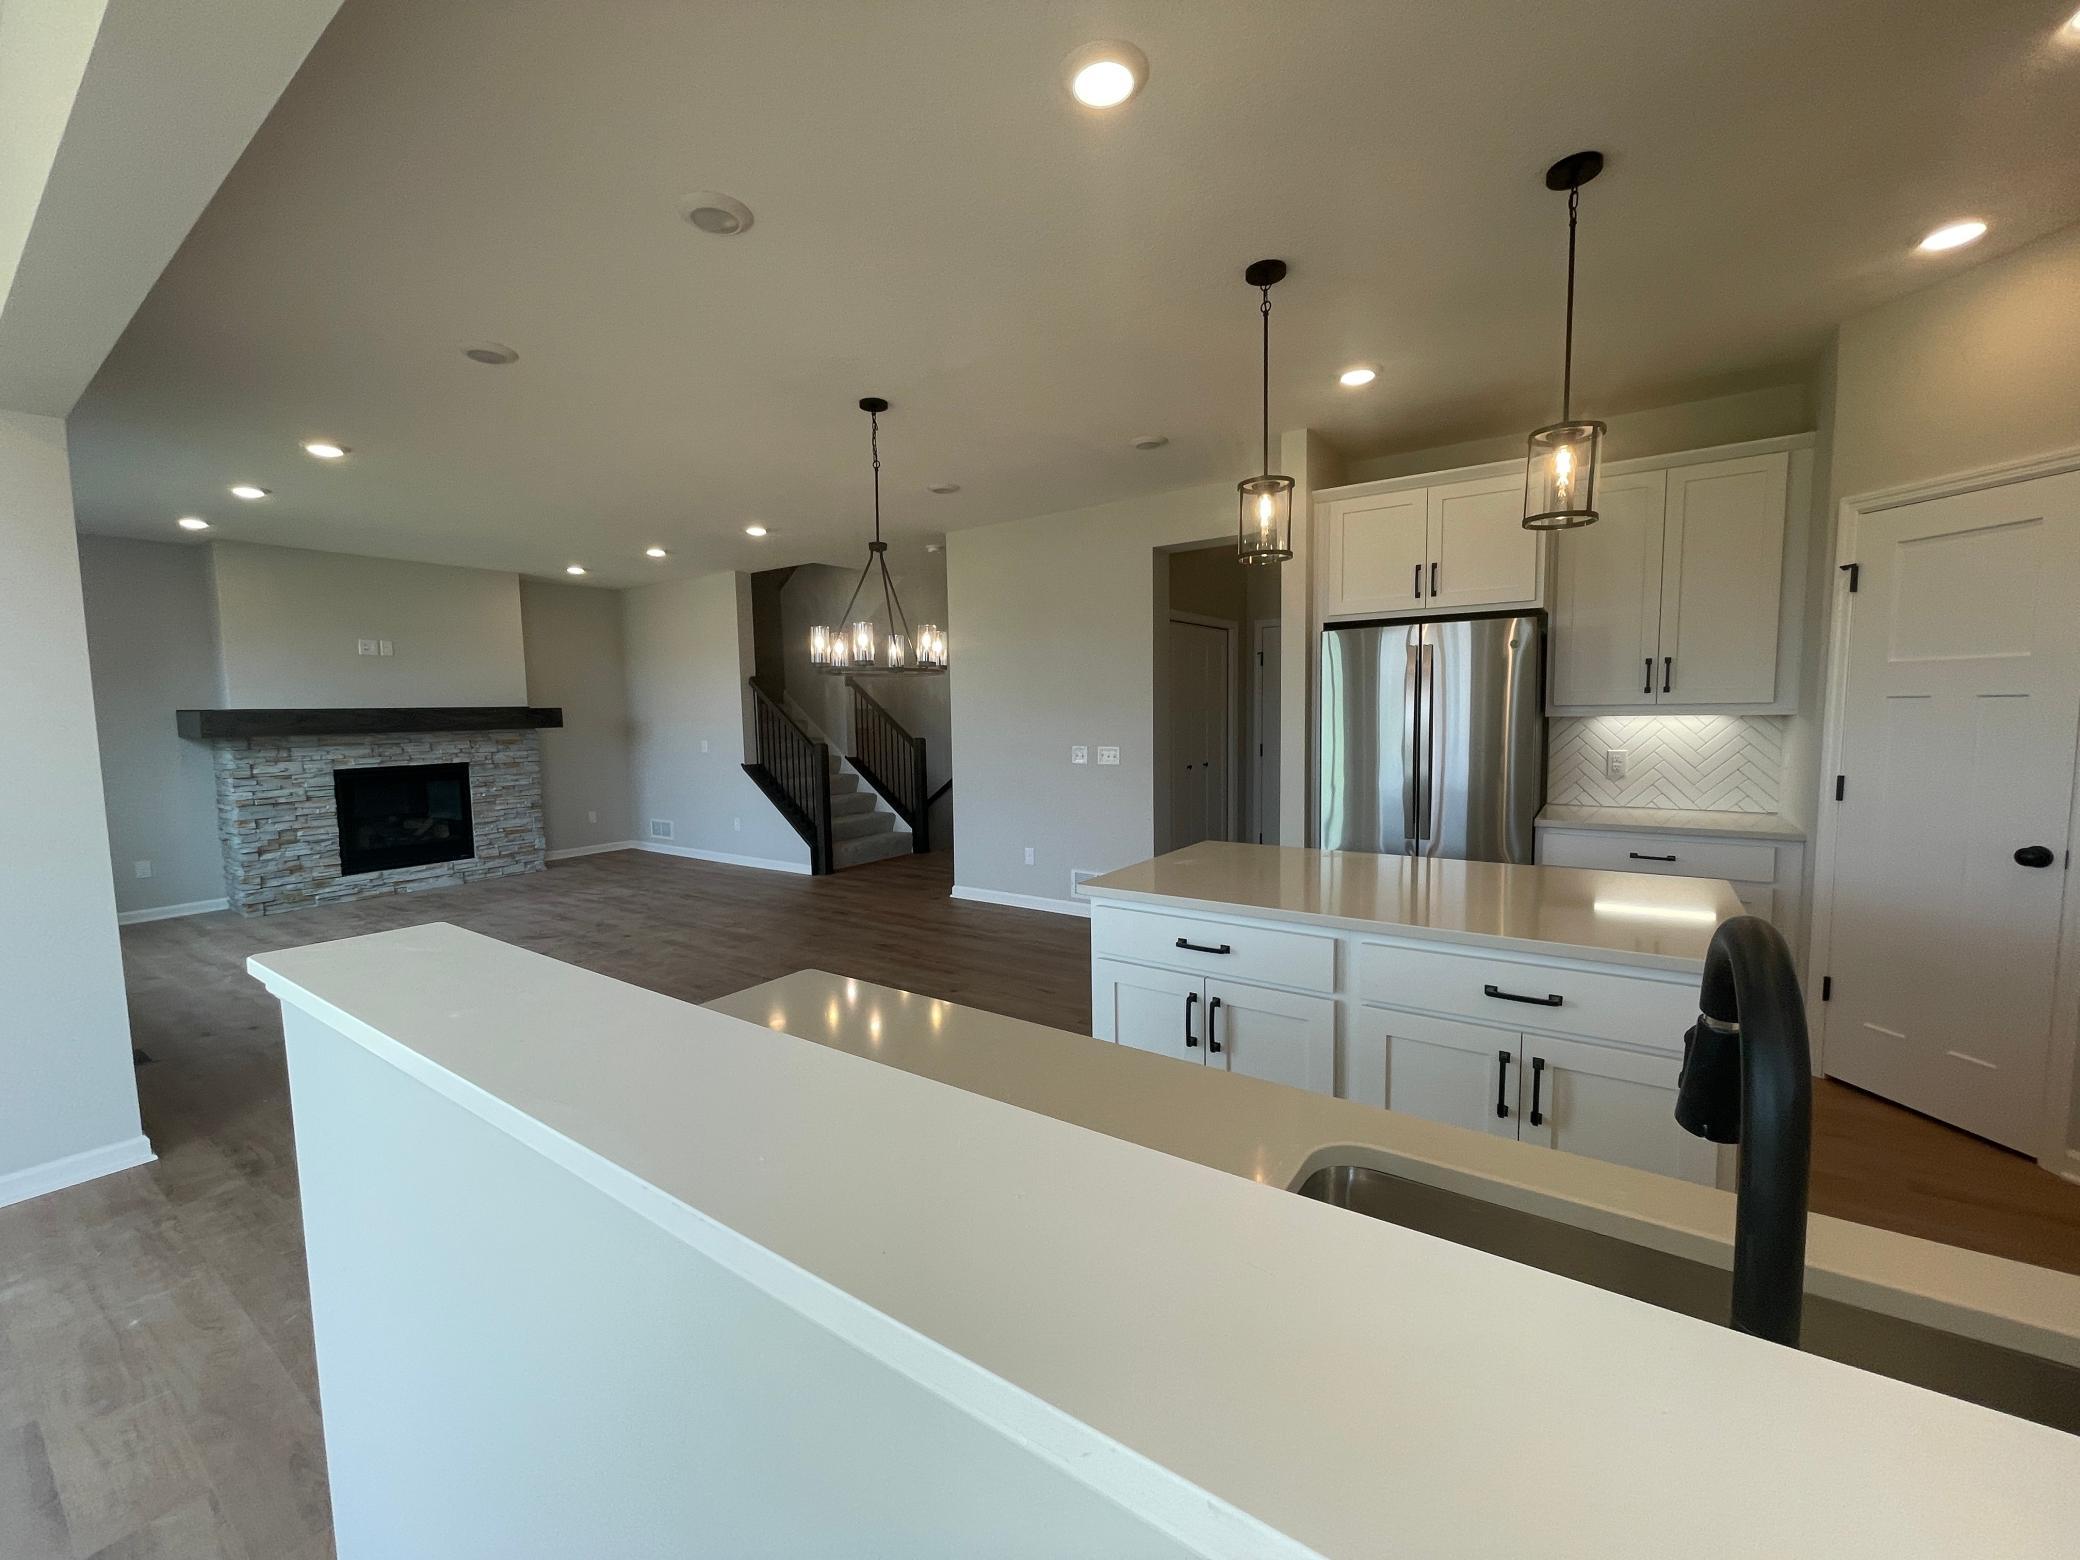 Kitchen, Dining and Family Room are you ready for a Large Gathering?